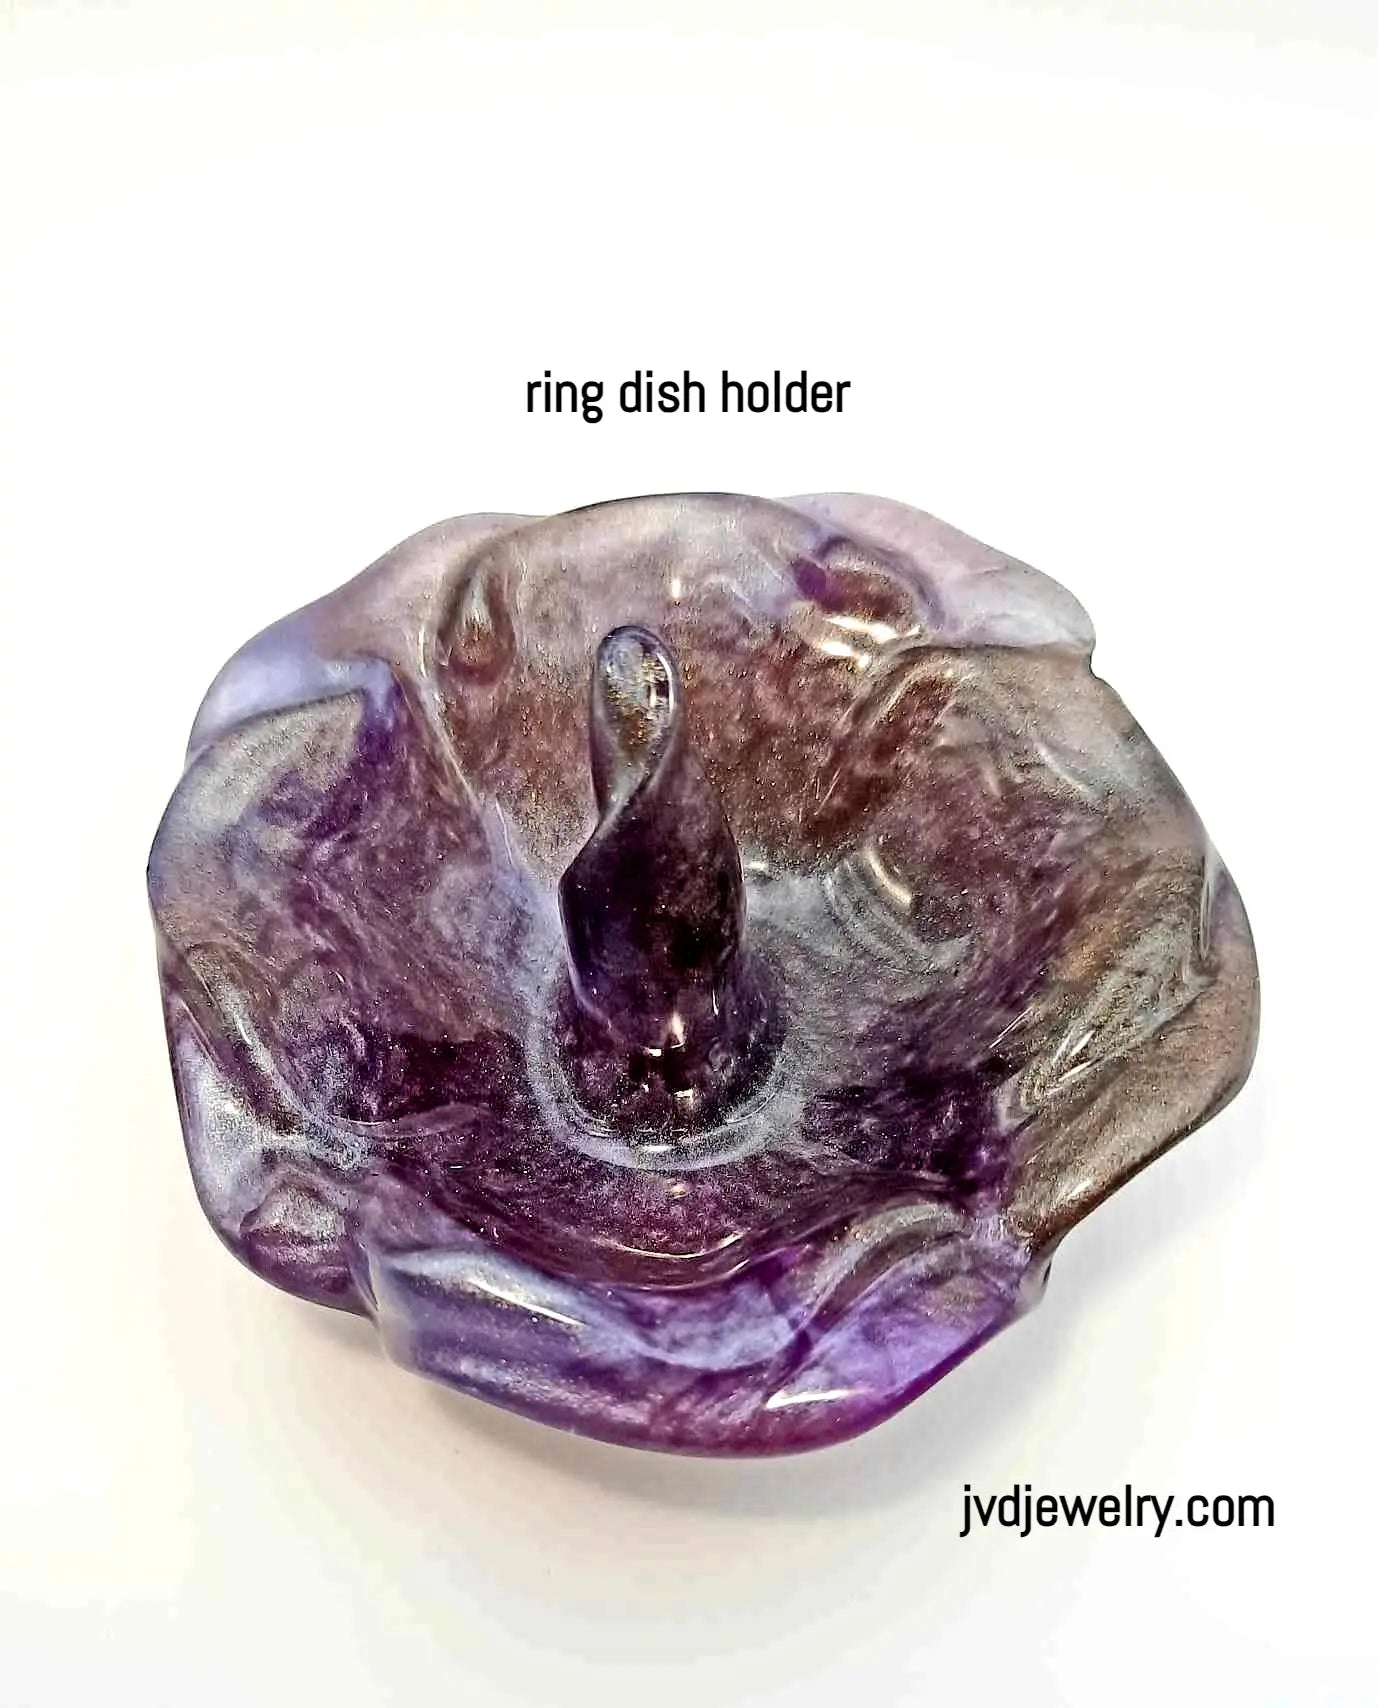 Marbled purple ring dish resin accessories - Image #2